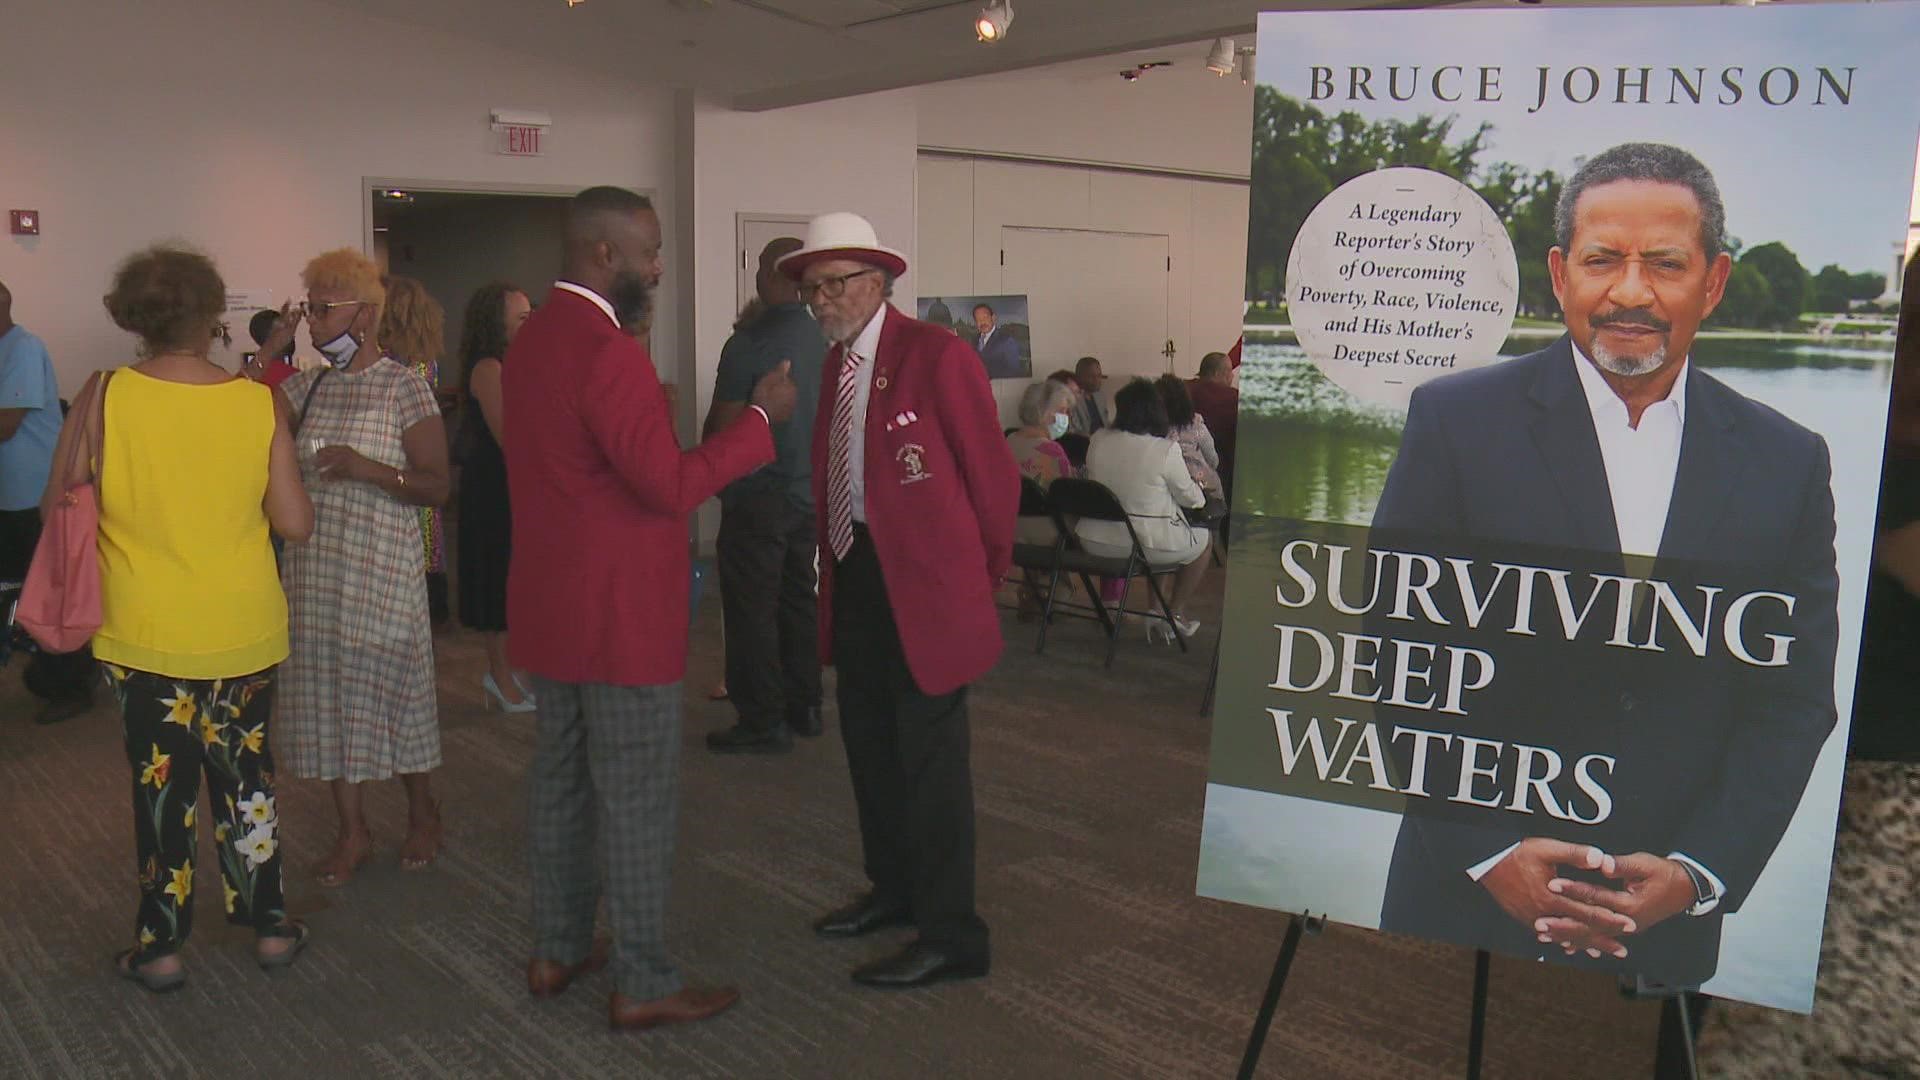 Bruce Johnson was born in west Louisville. He died in April shortly after publishing his book, "Surviving Deep Waters."